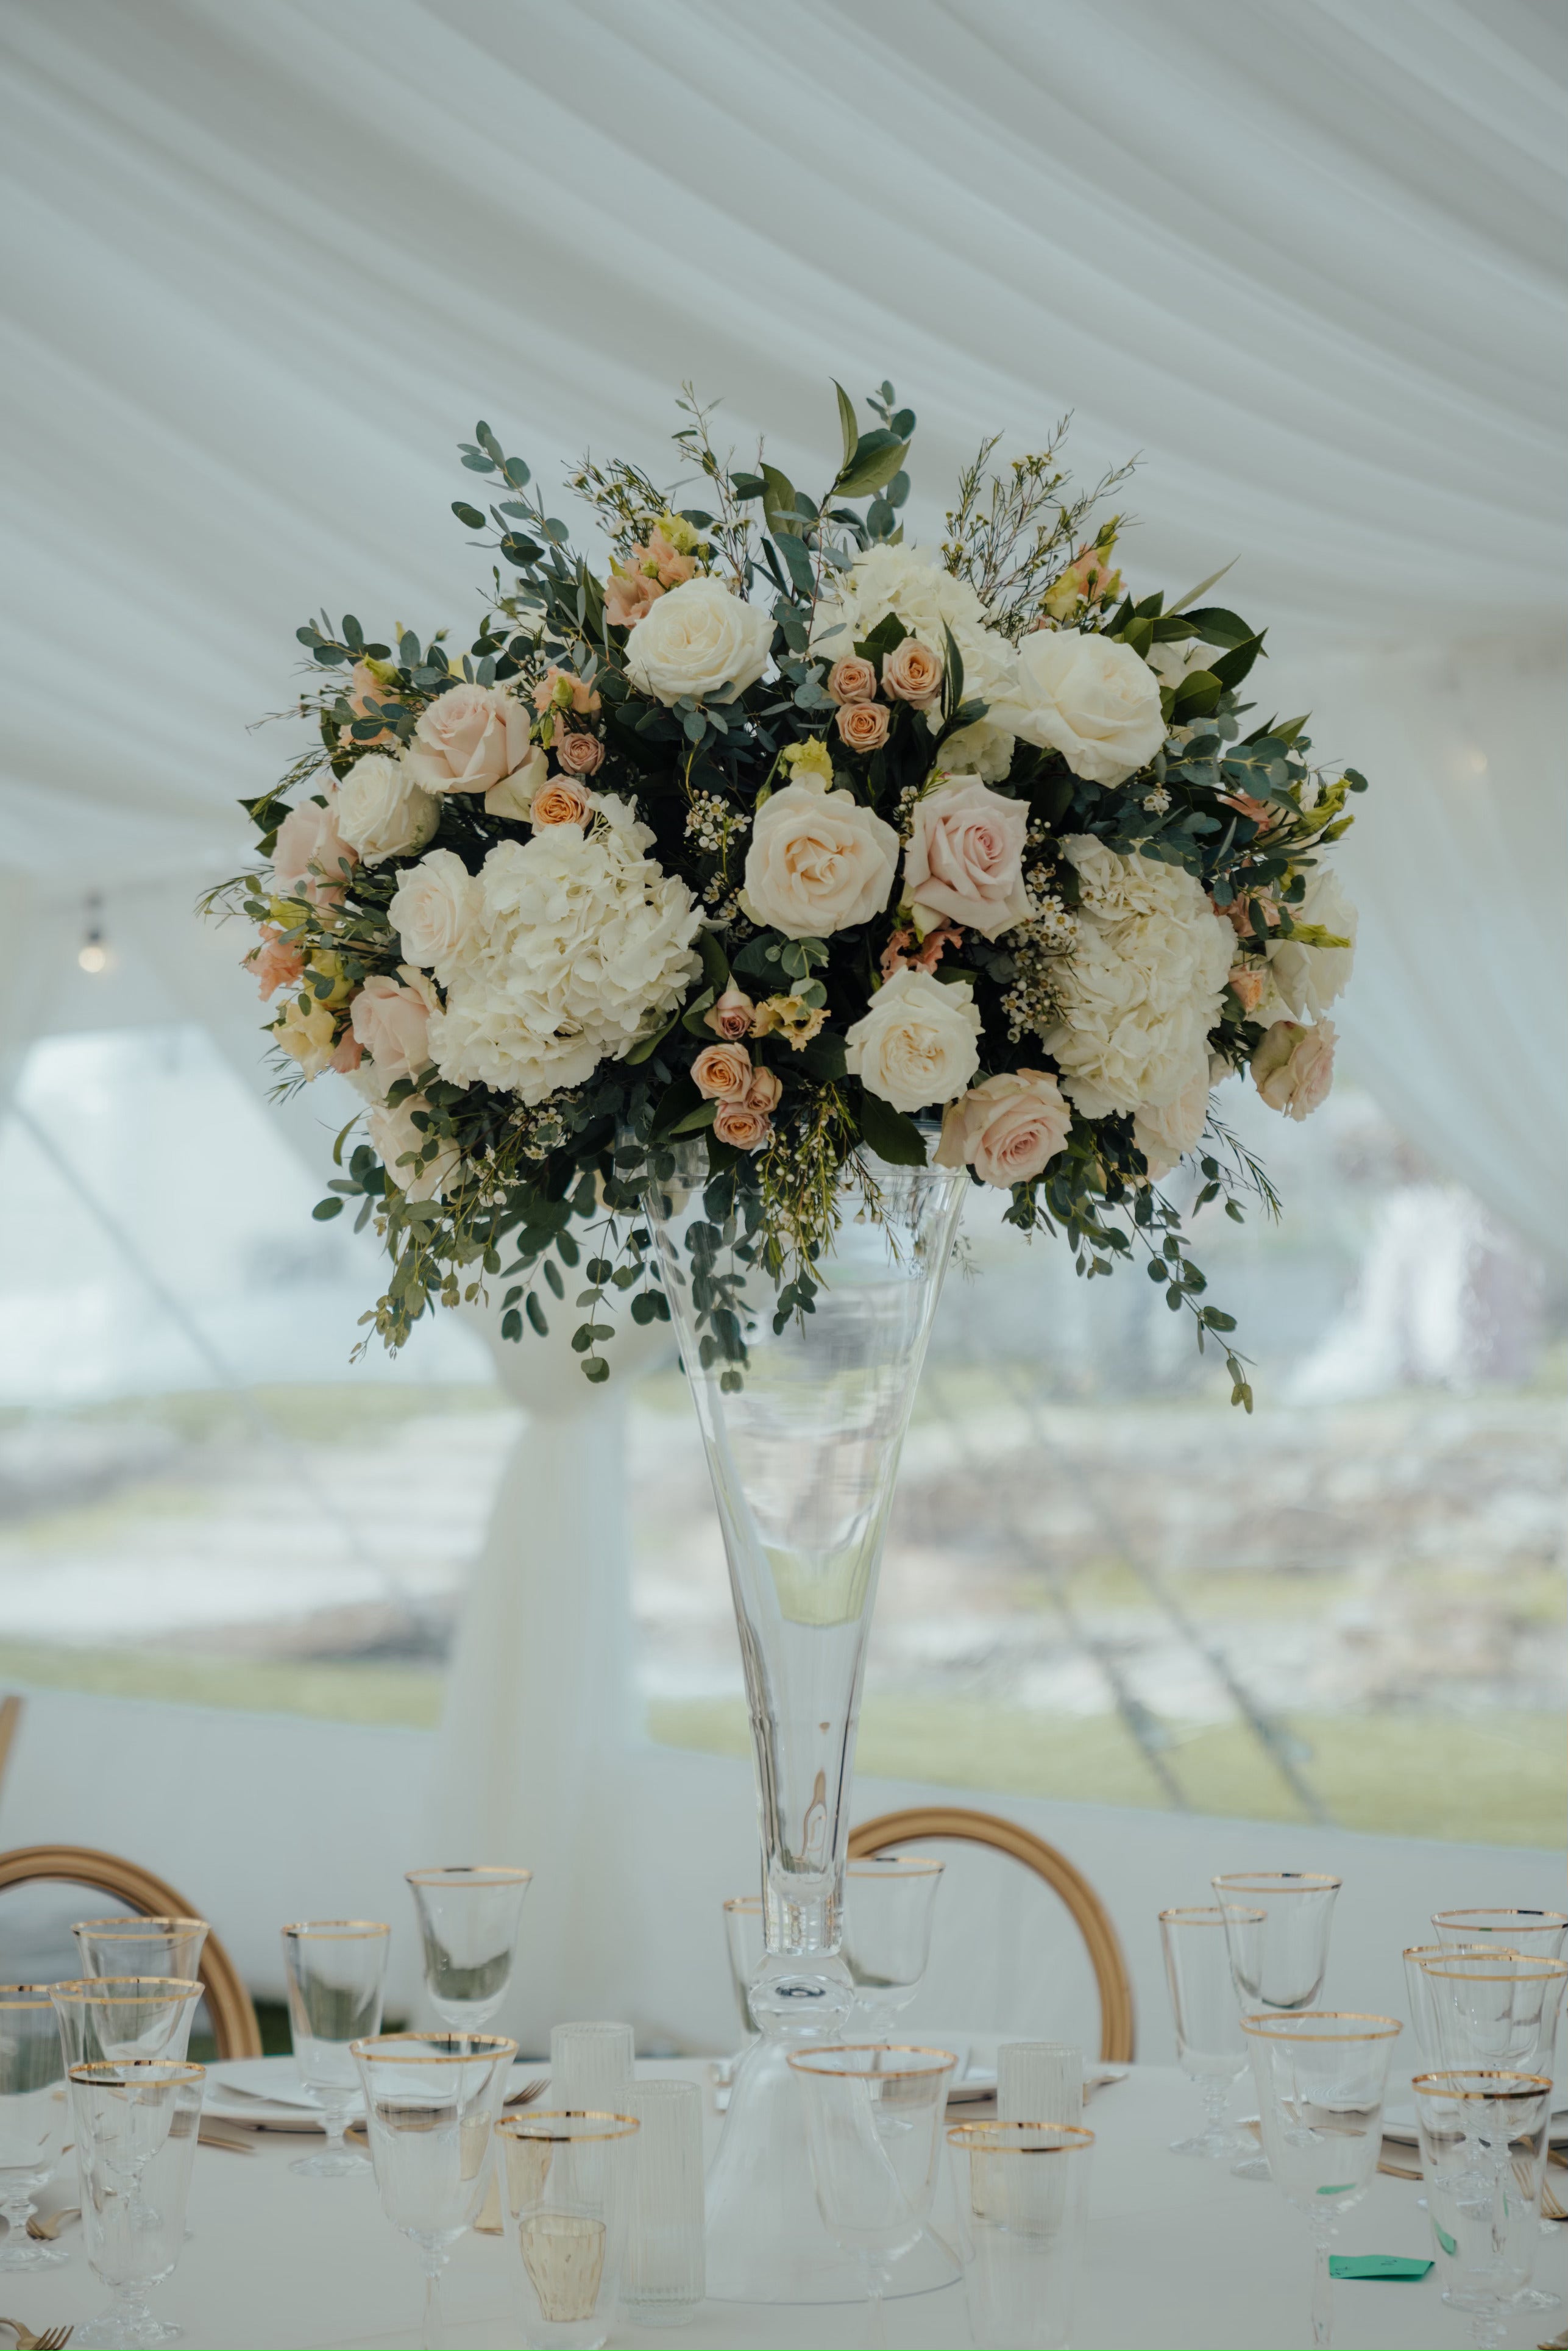 Stunning wedding centerpiece featuring flowers in a tall, trumpet-shaped glass vase